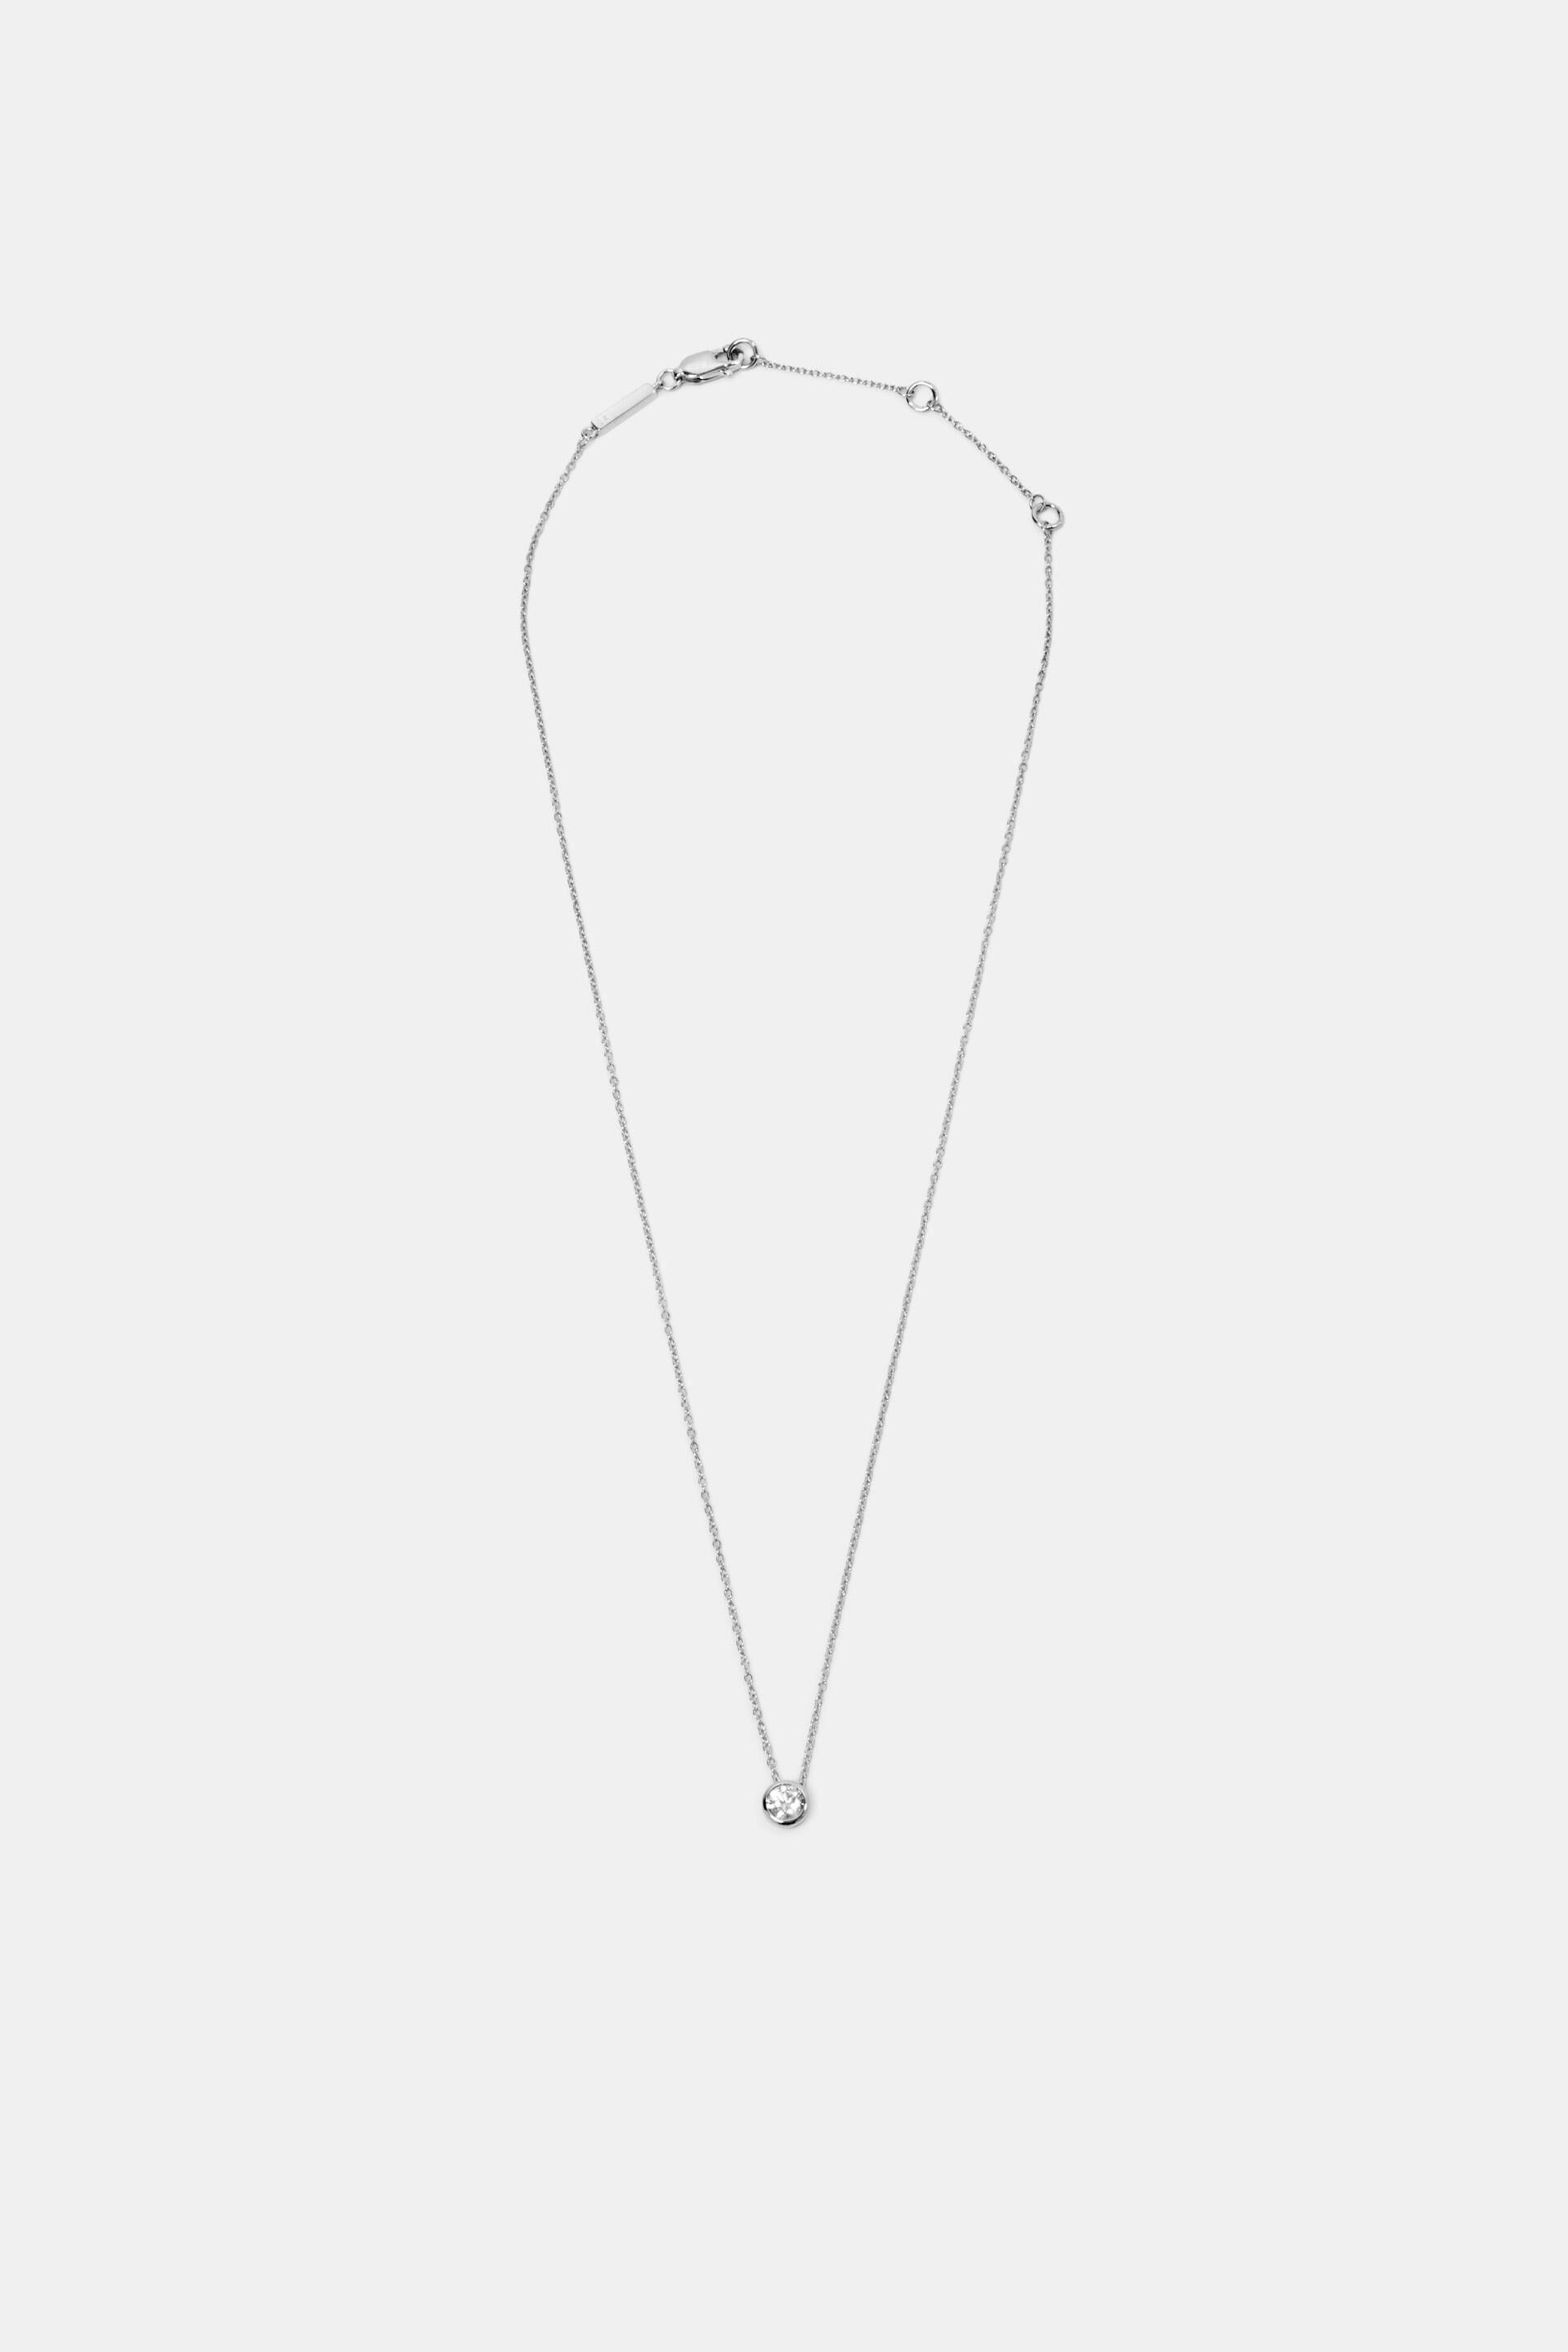 Esprit Necklace sterling silver with zirconia,